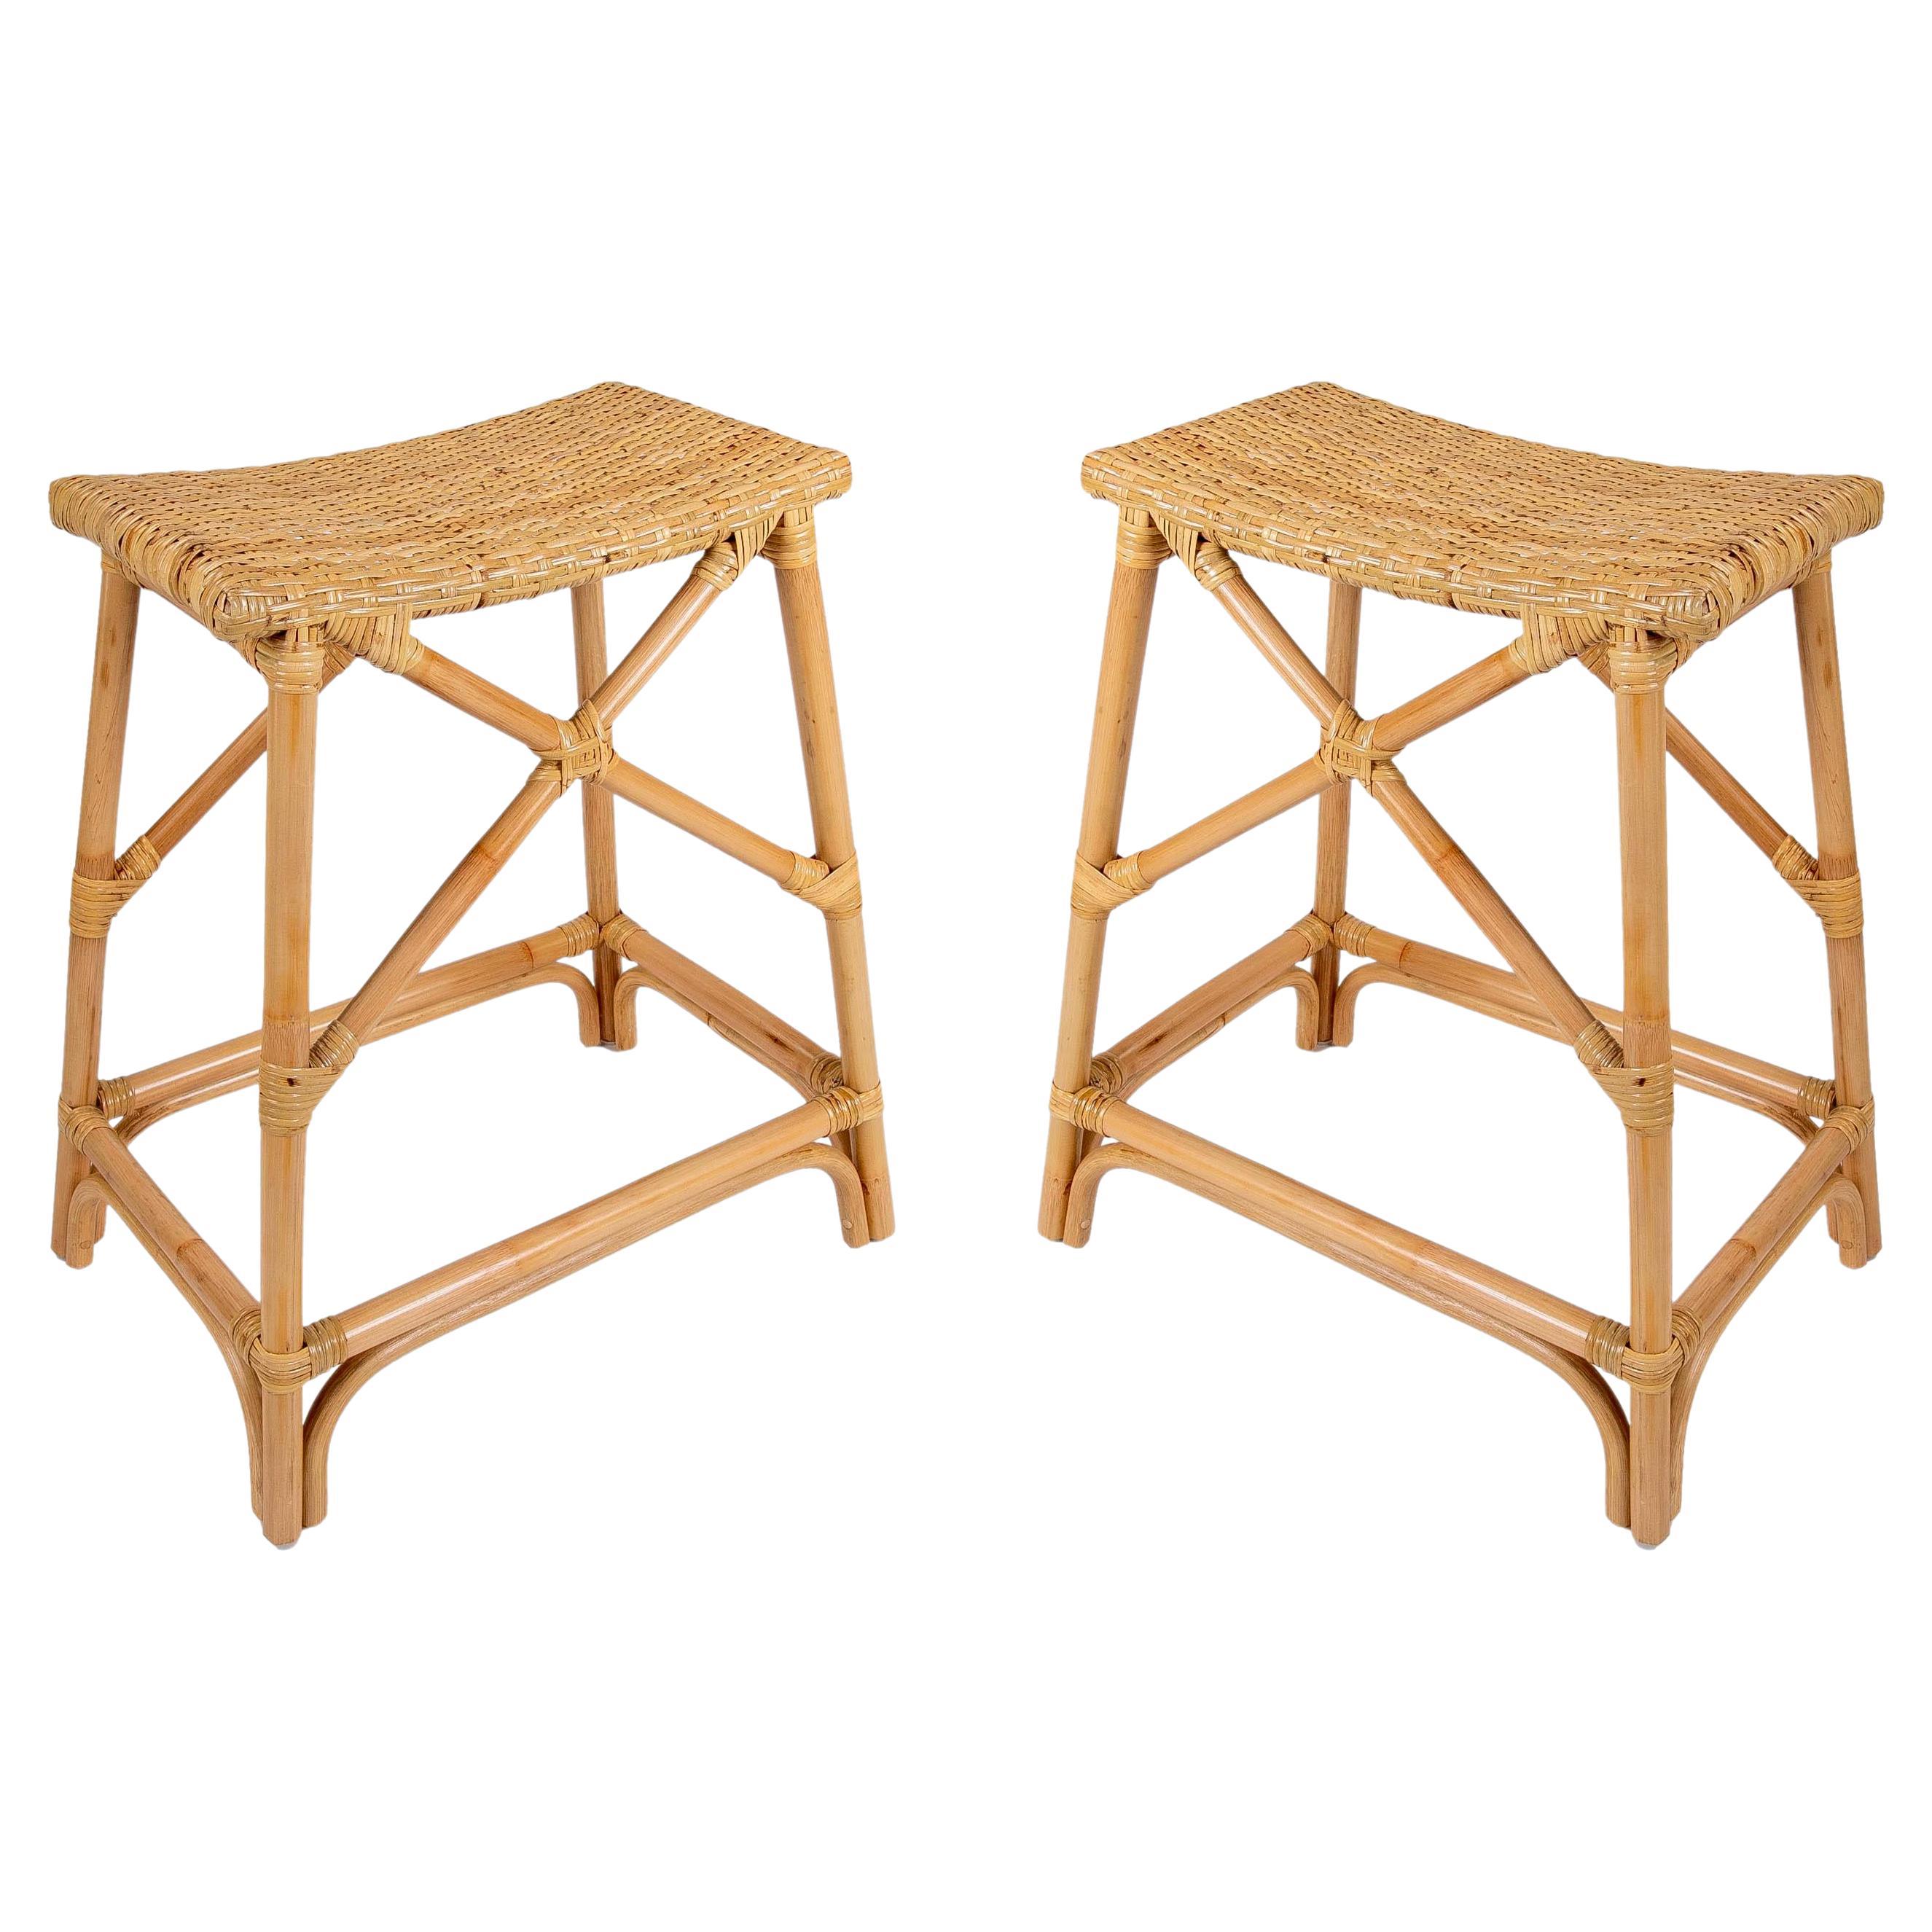 Pair of Two Rattan and Wicker Bar Stools with Interlaced Seats